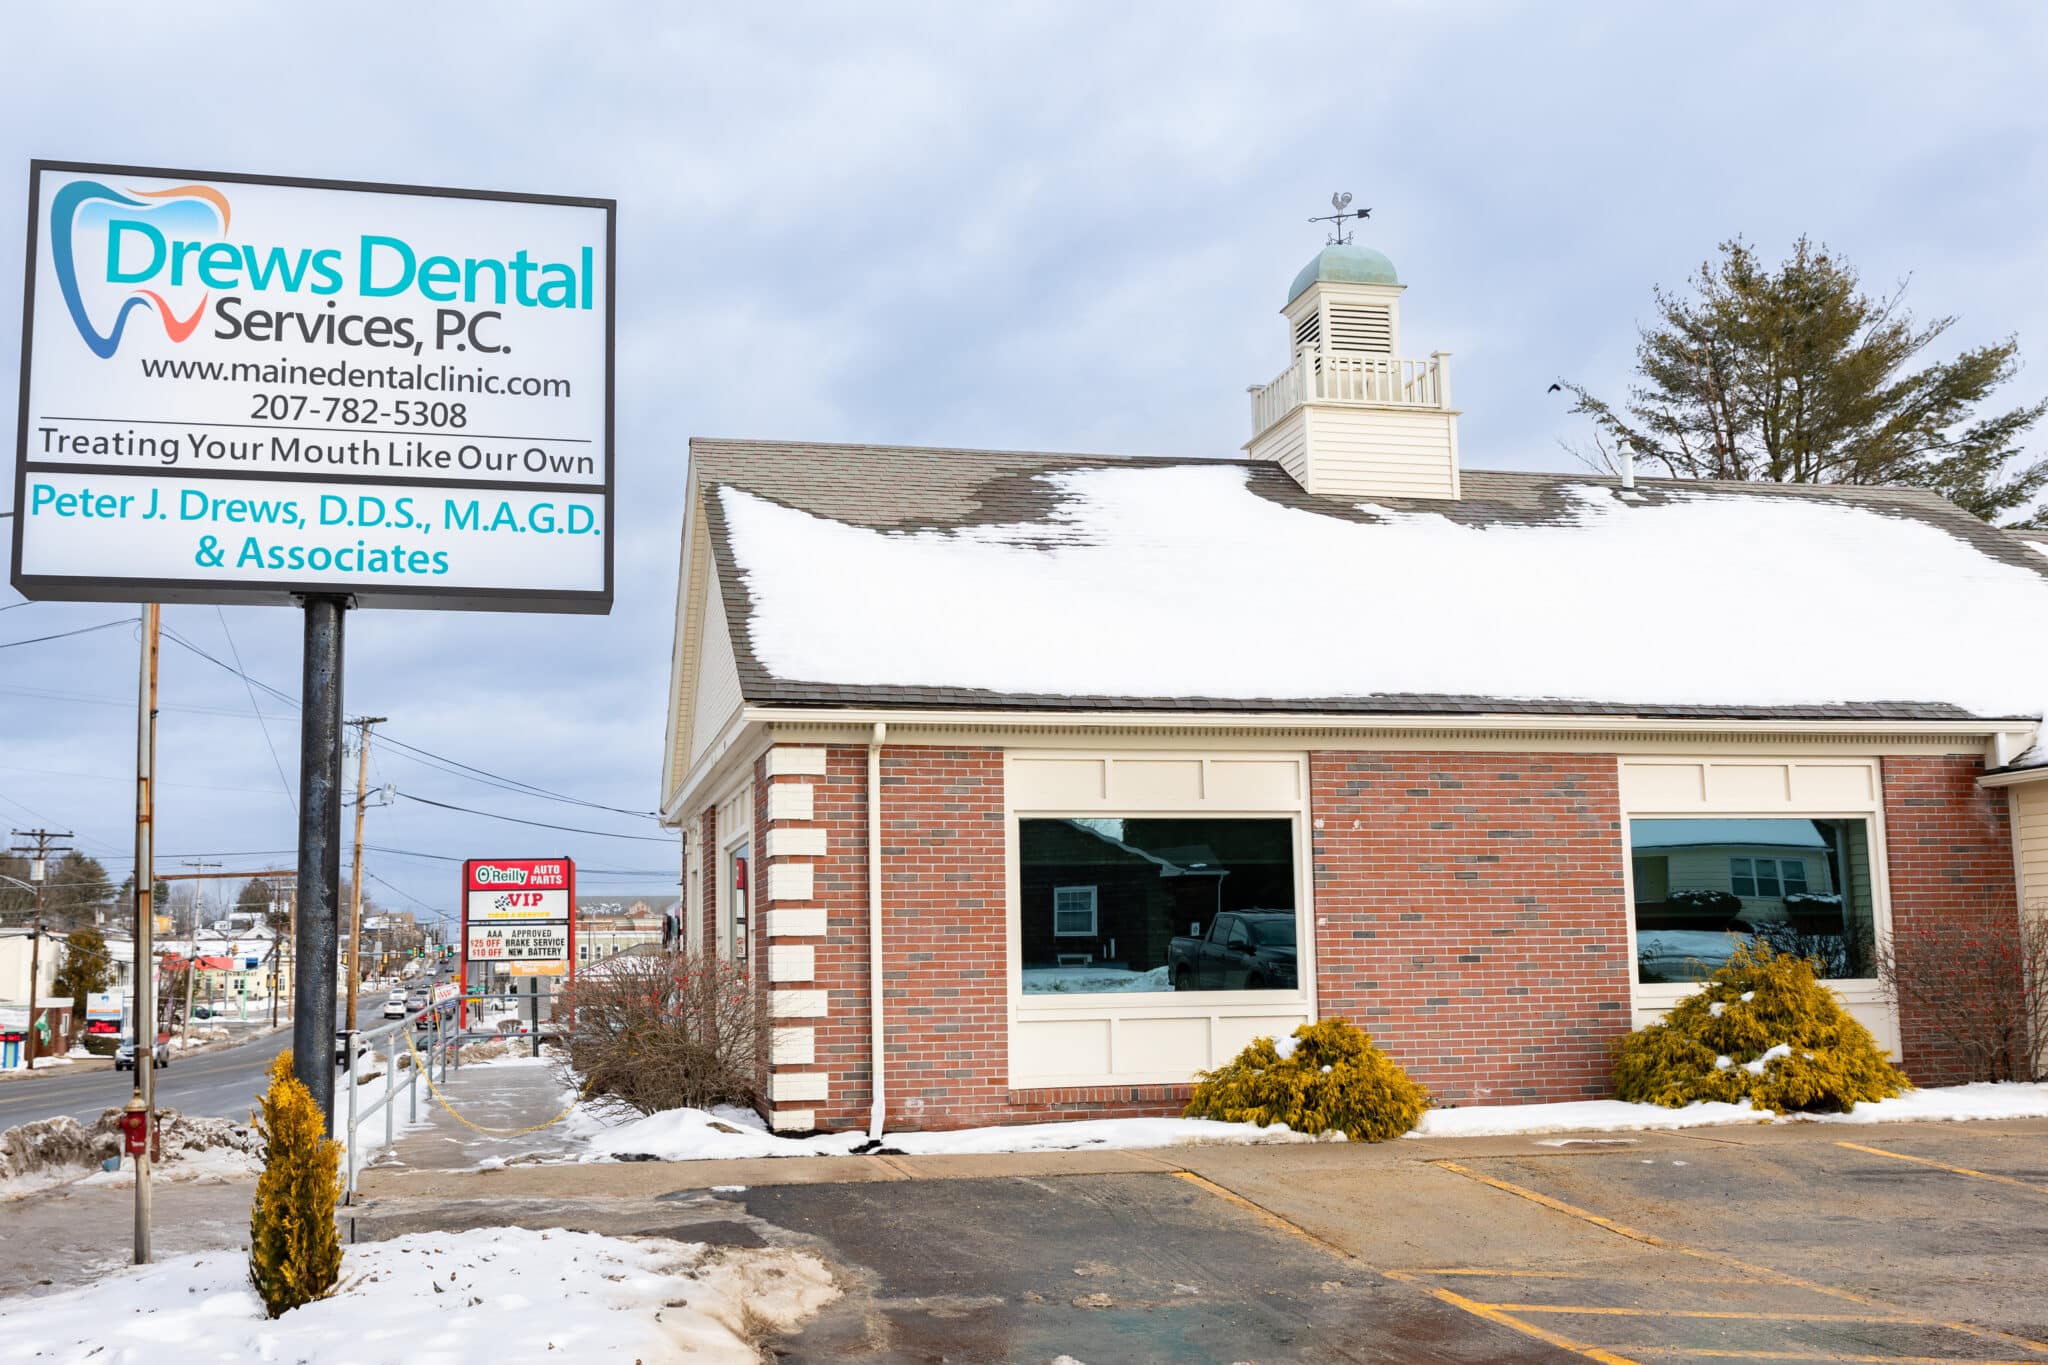 Drews Dental Services Building and Sign in Lewiston